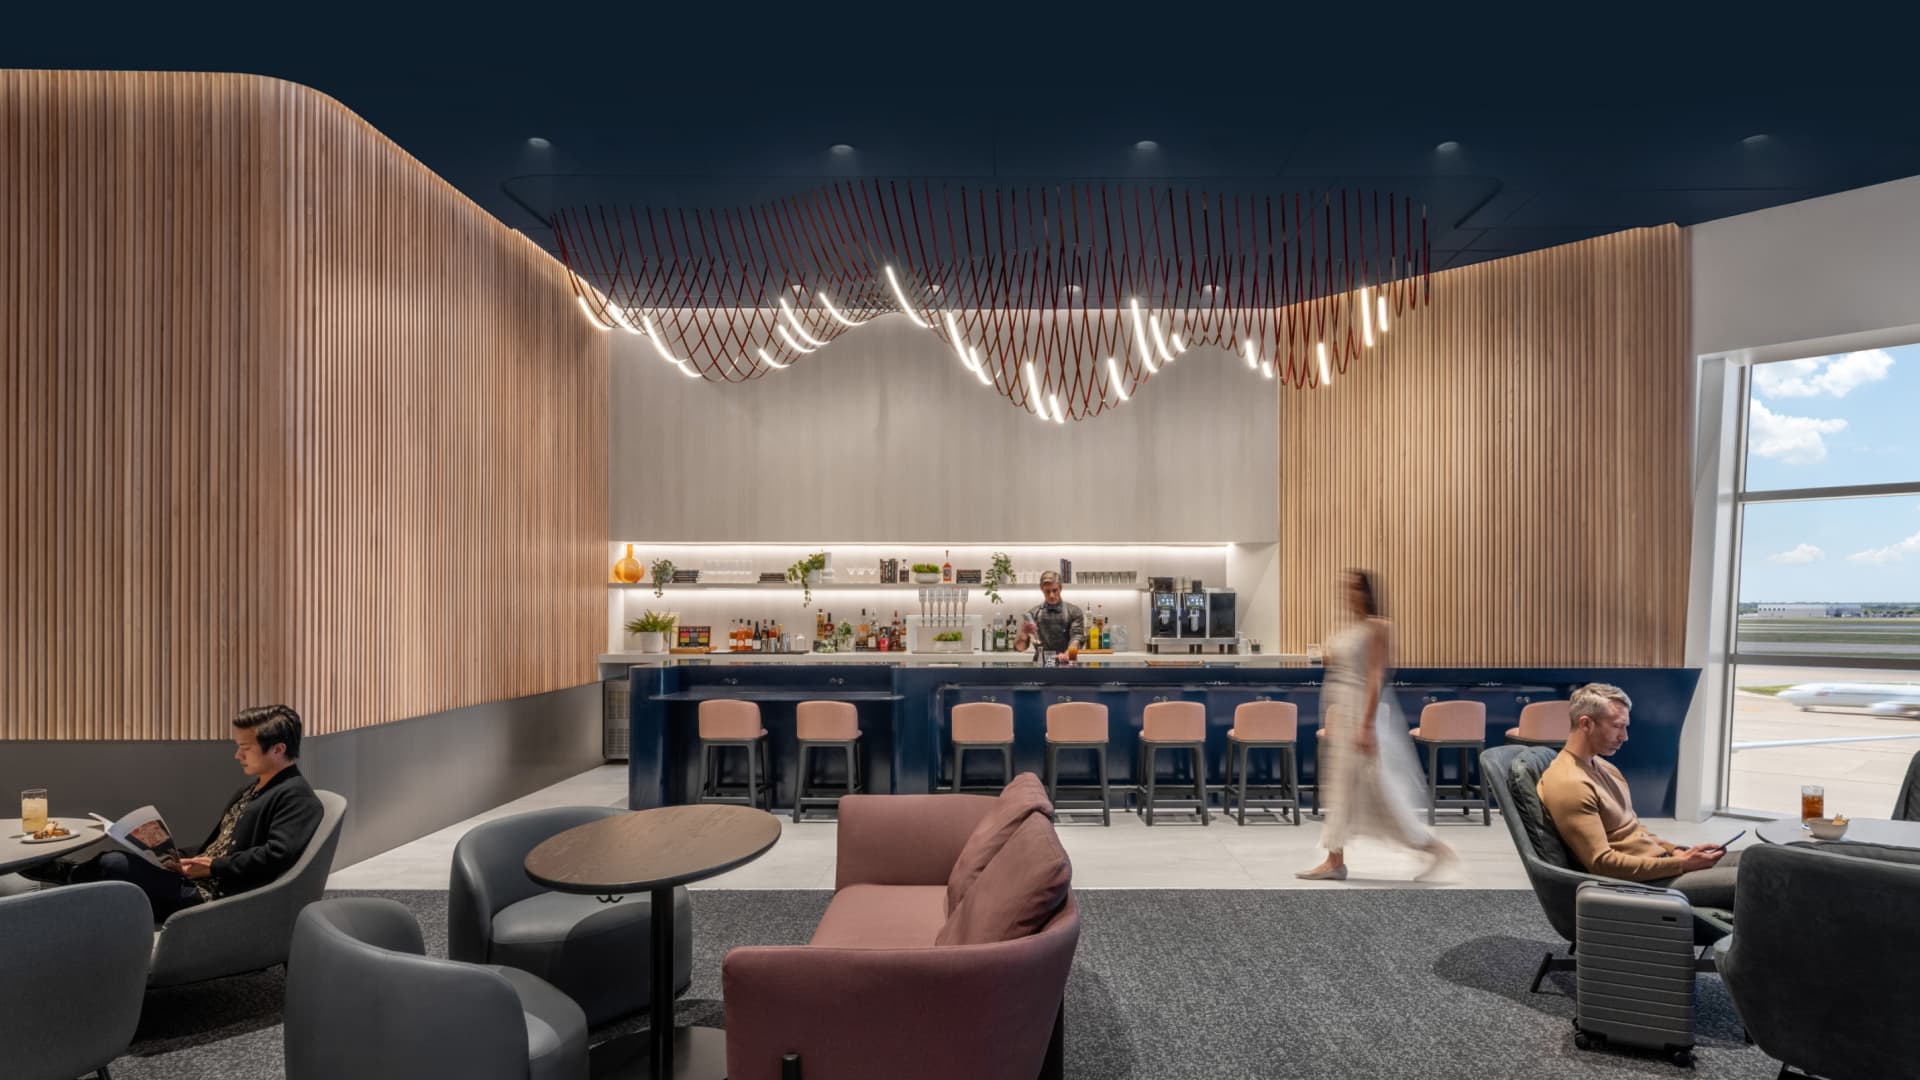 Here's how to access Capital One's new airport lounges, which feature nap pods and Peloton bikes